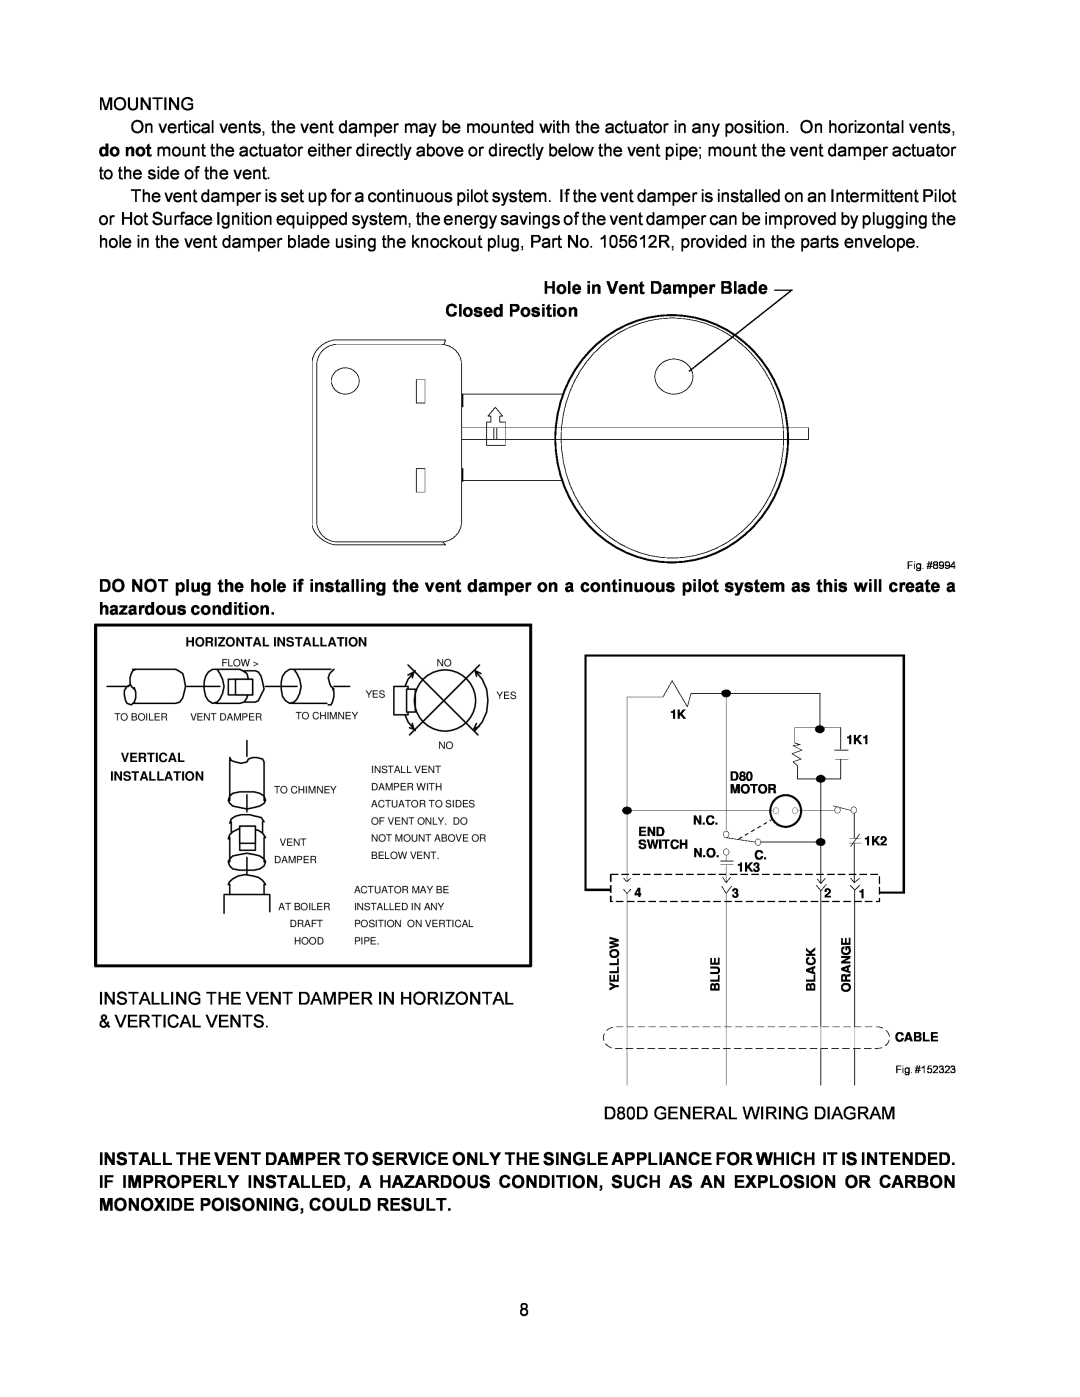 Raypak 0090B 0135B installation instructions Hole in Vent Damper Blade Closed Position 